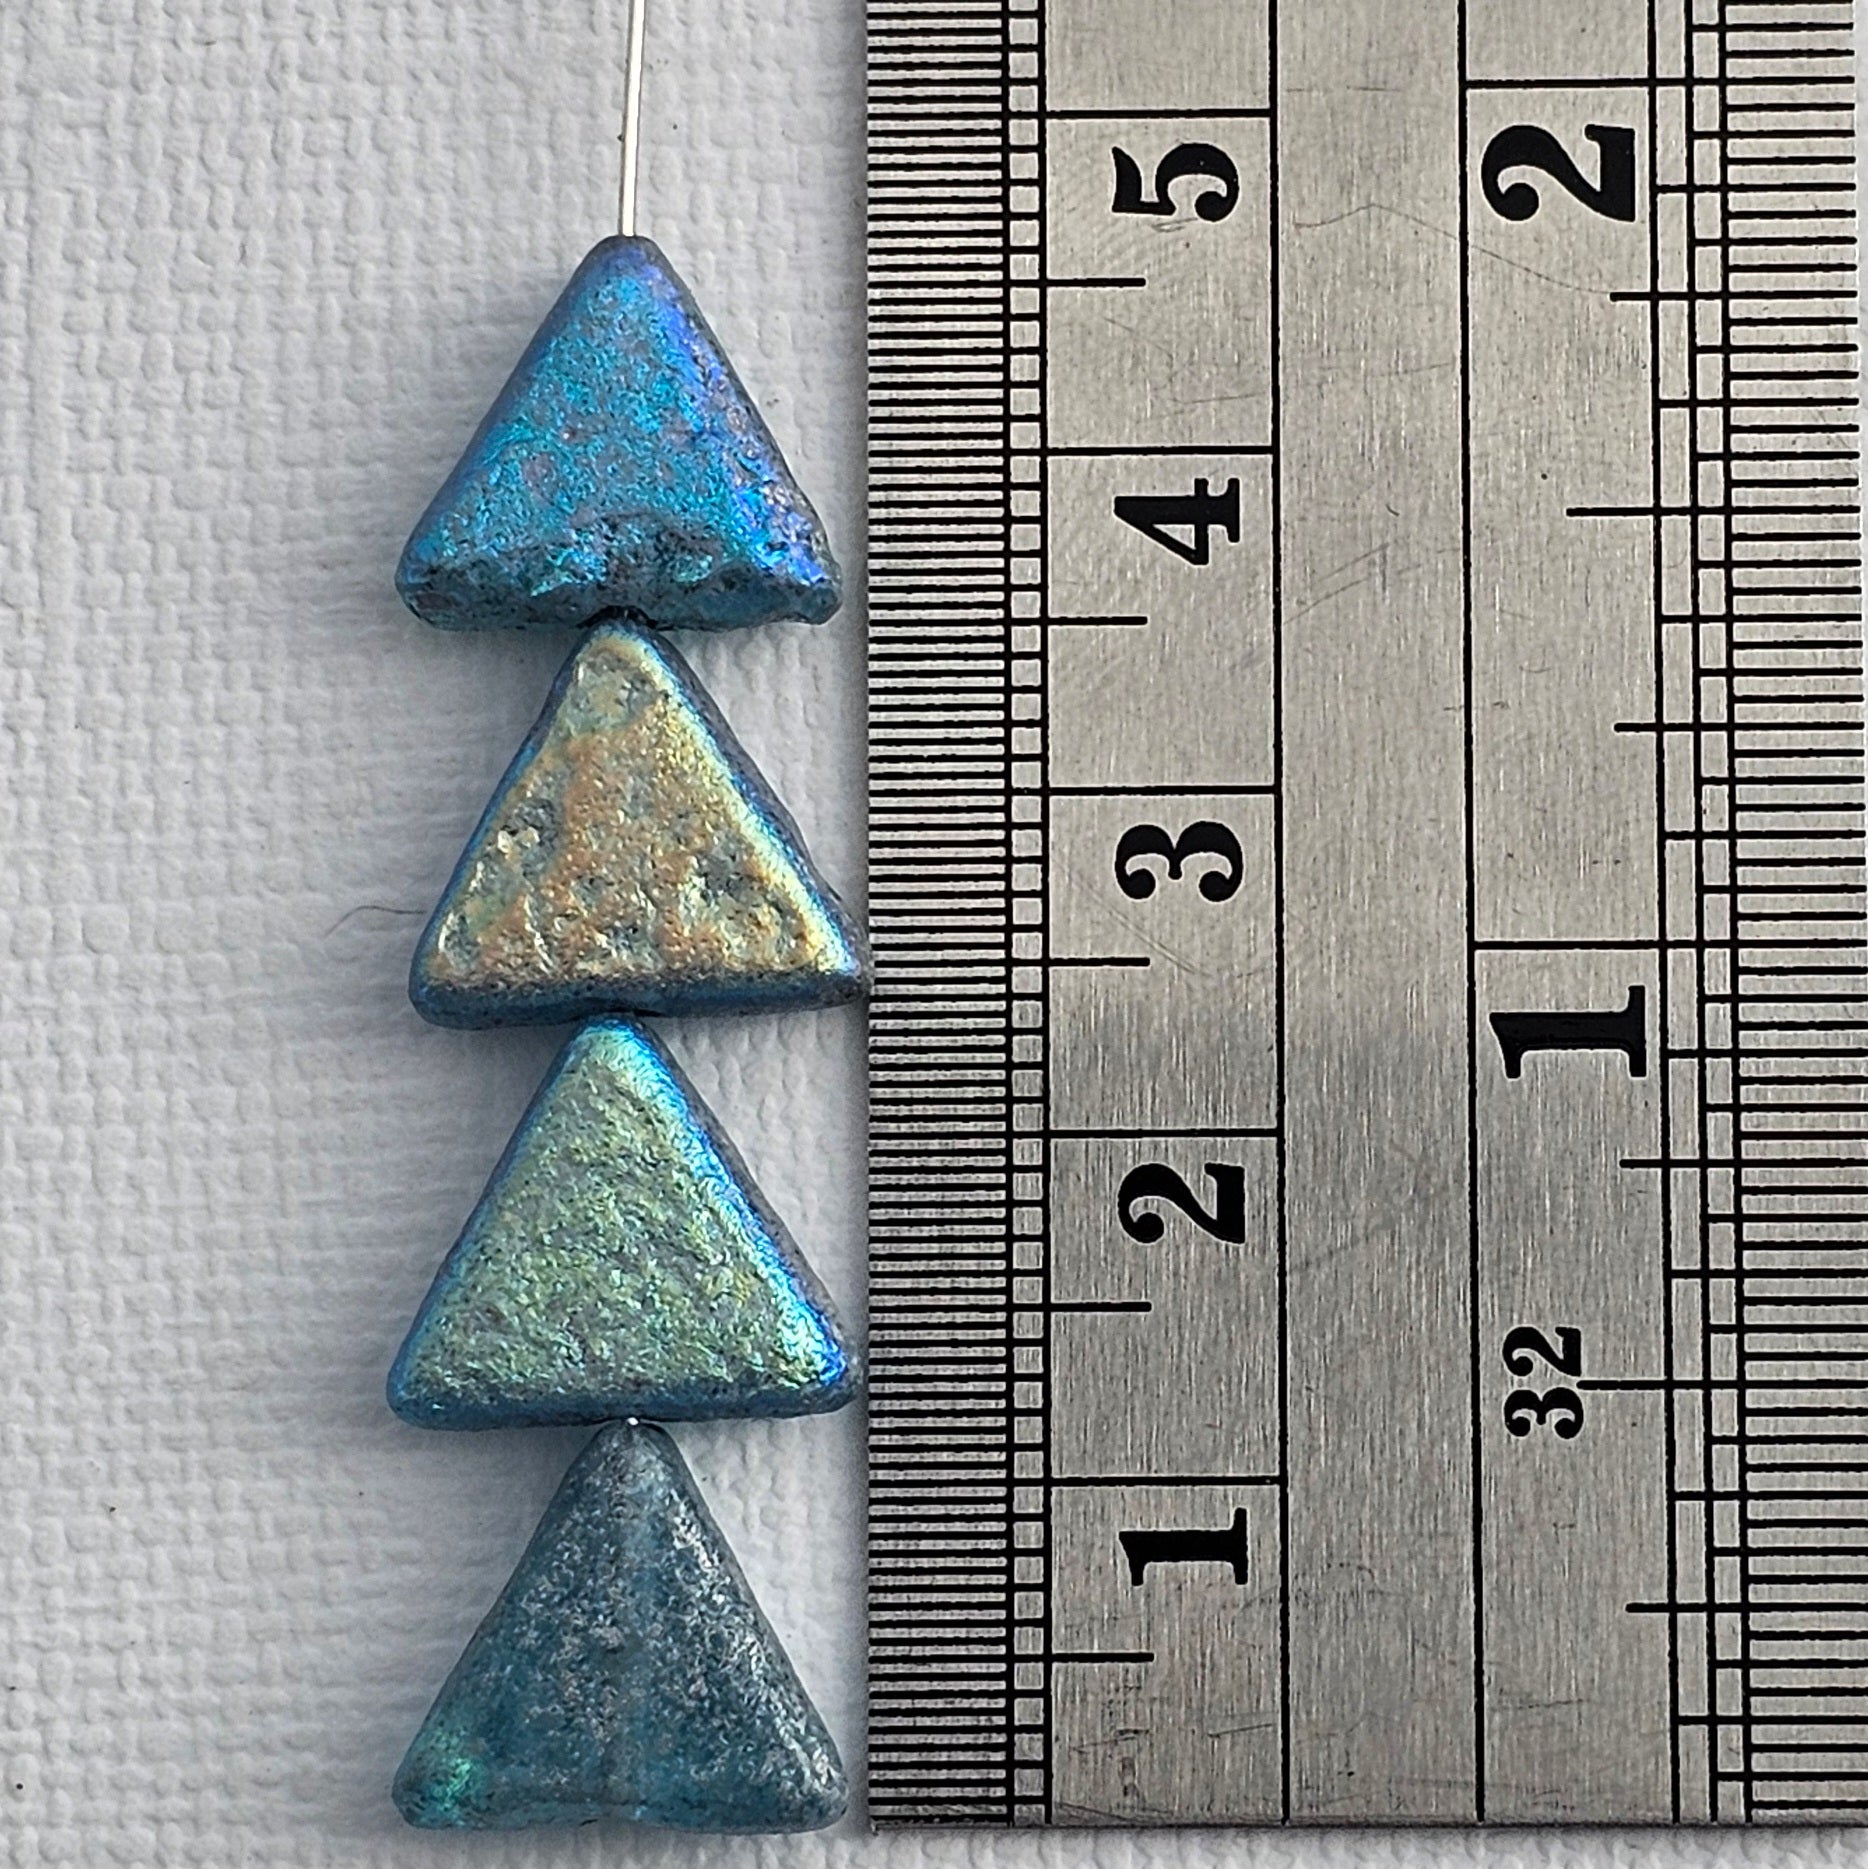 12mm - Aqua/Silver Speckle/AB - Acid Etched Double Coated Triangles